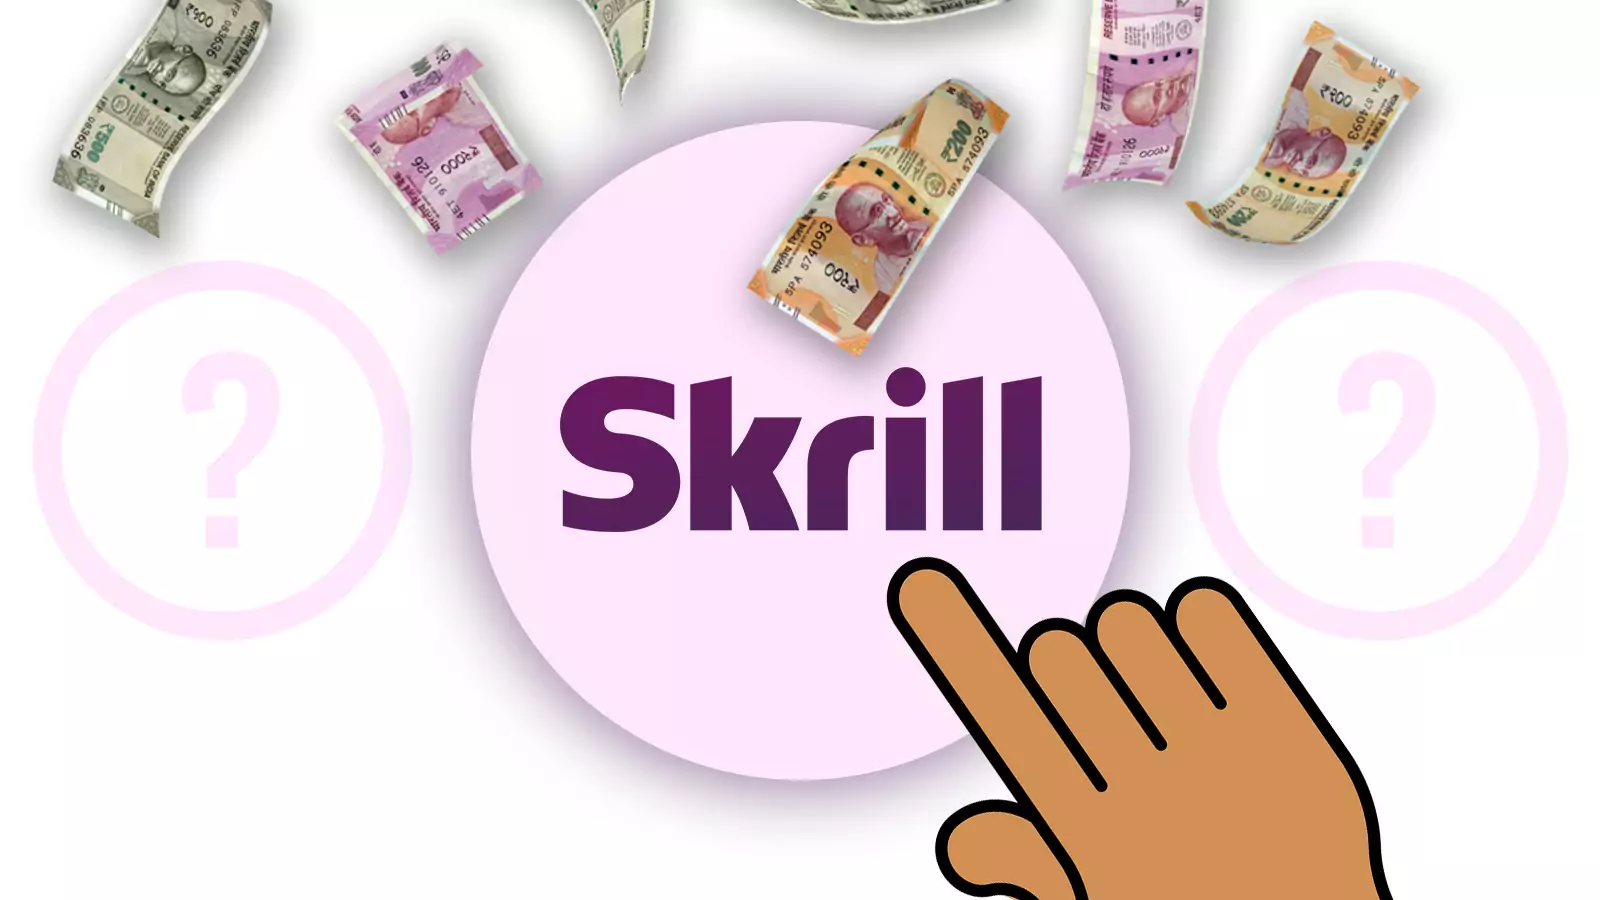 Depositing to Skrill is simple and doesn't take a lot of time or effort.